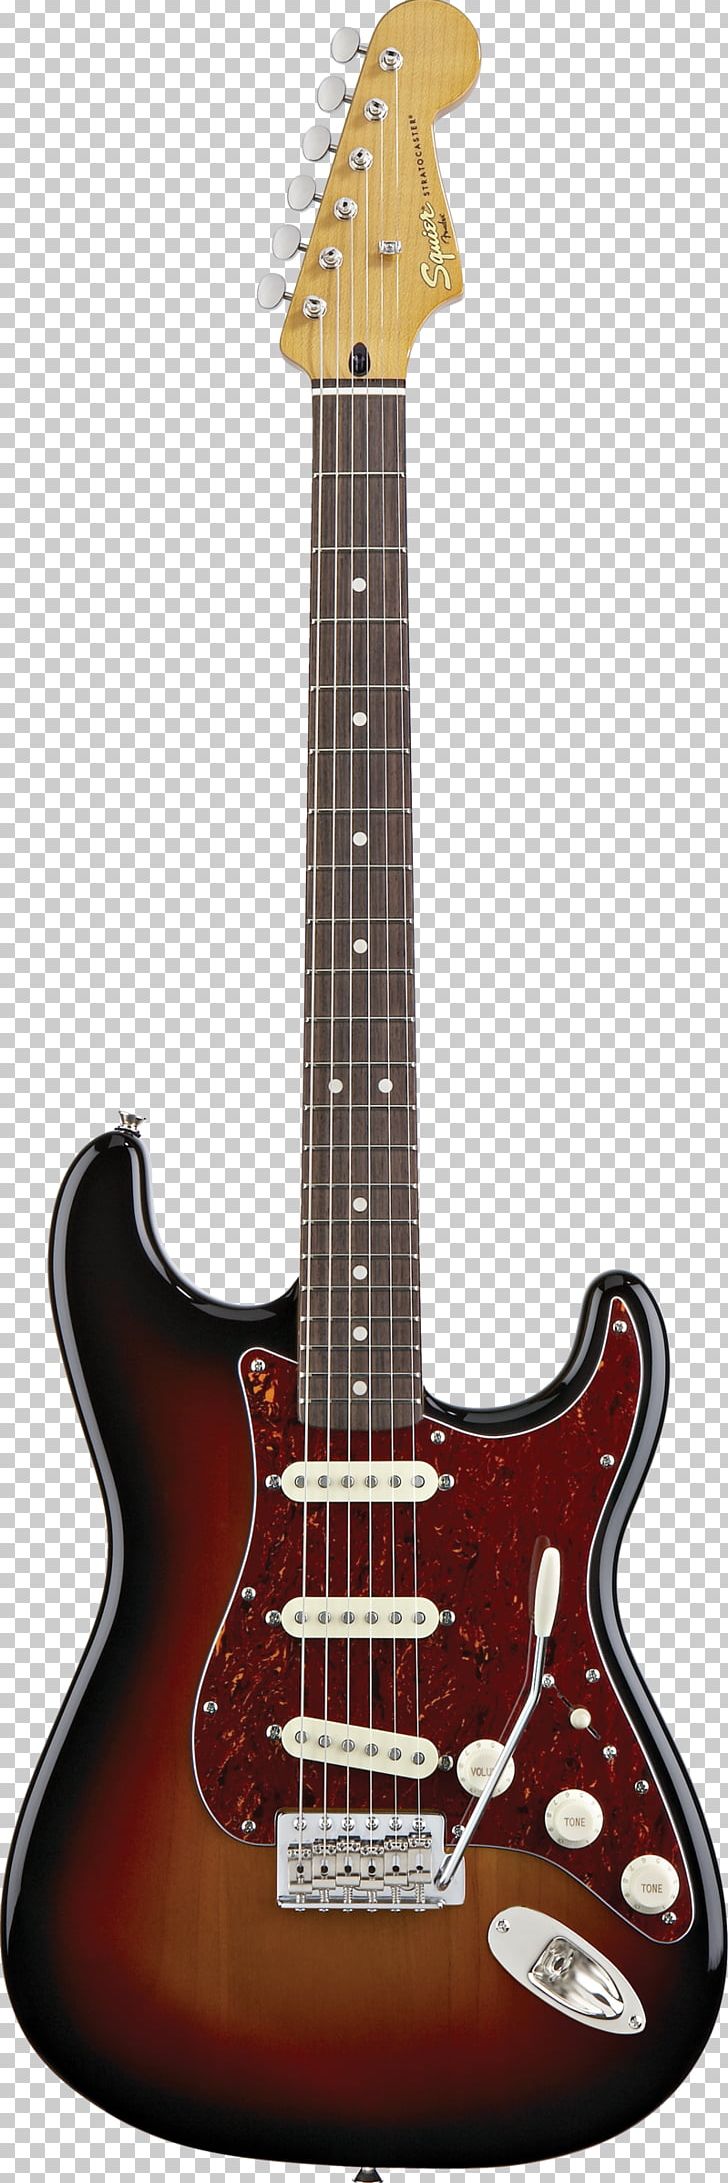 Squier Deluxe Hot Rails Stratocaster Fender Stratocaster Electric Guitar Fender Musical Instruments Corporation PNG, Clipart, Acoustic Electric Guitar, Guitar Accessory, Mus, Objects, Pickup Free PNG Download